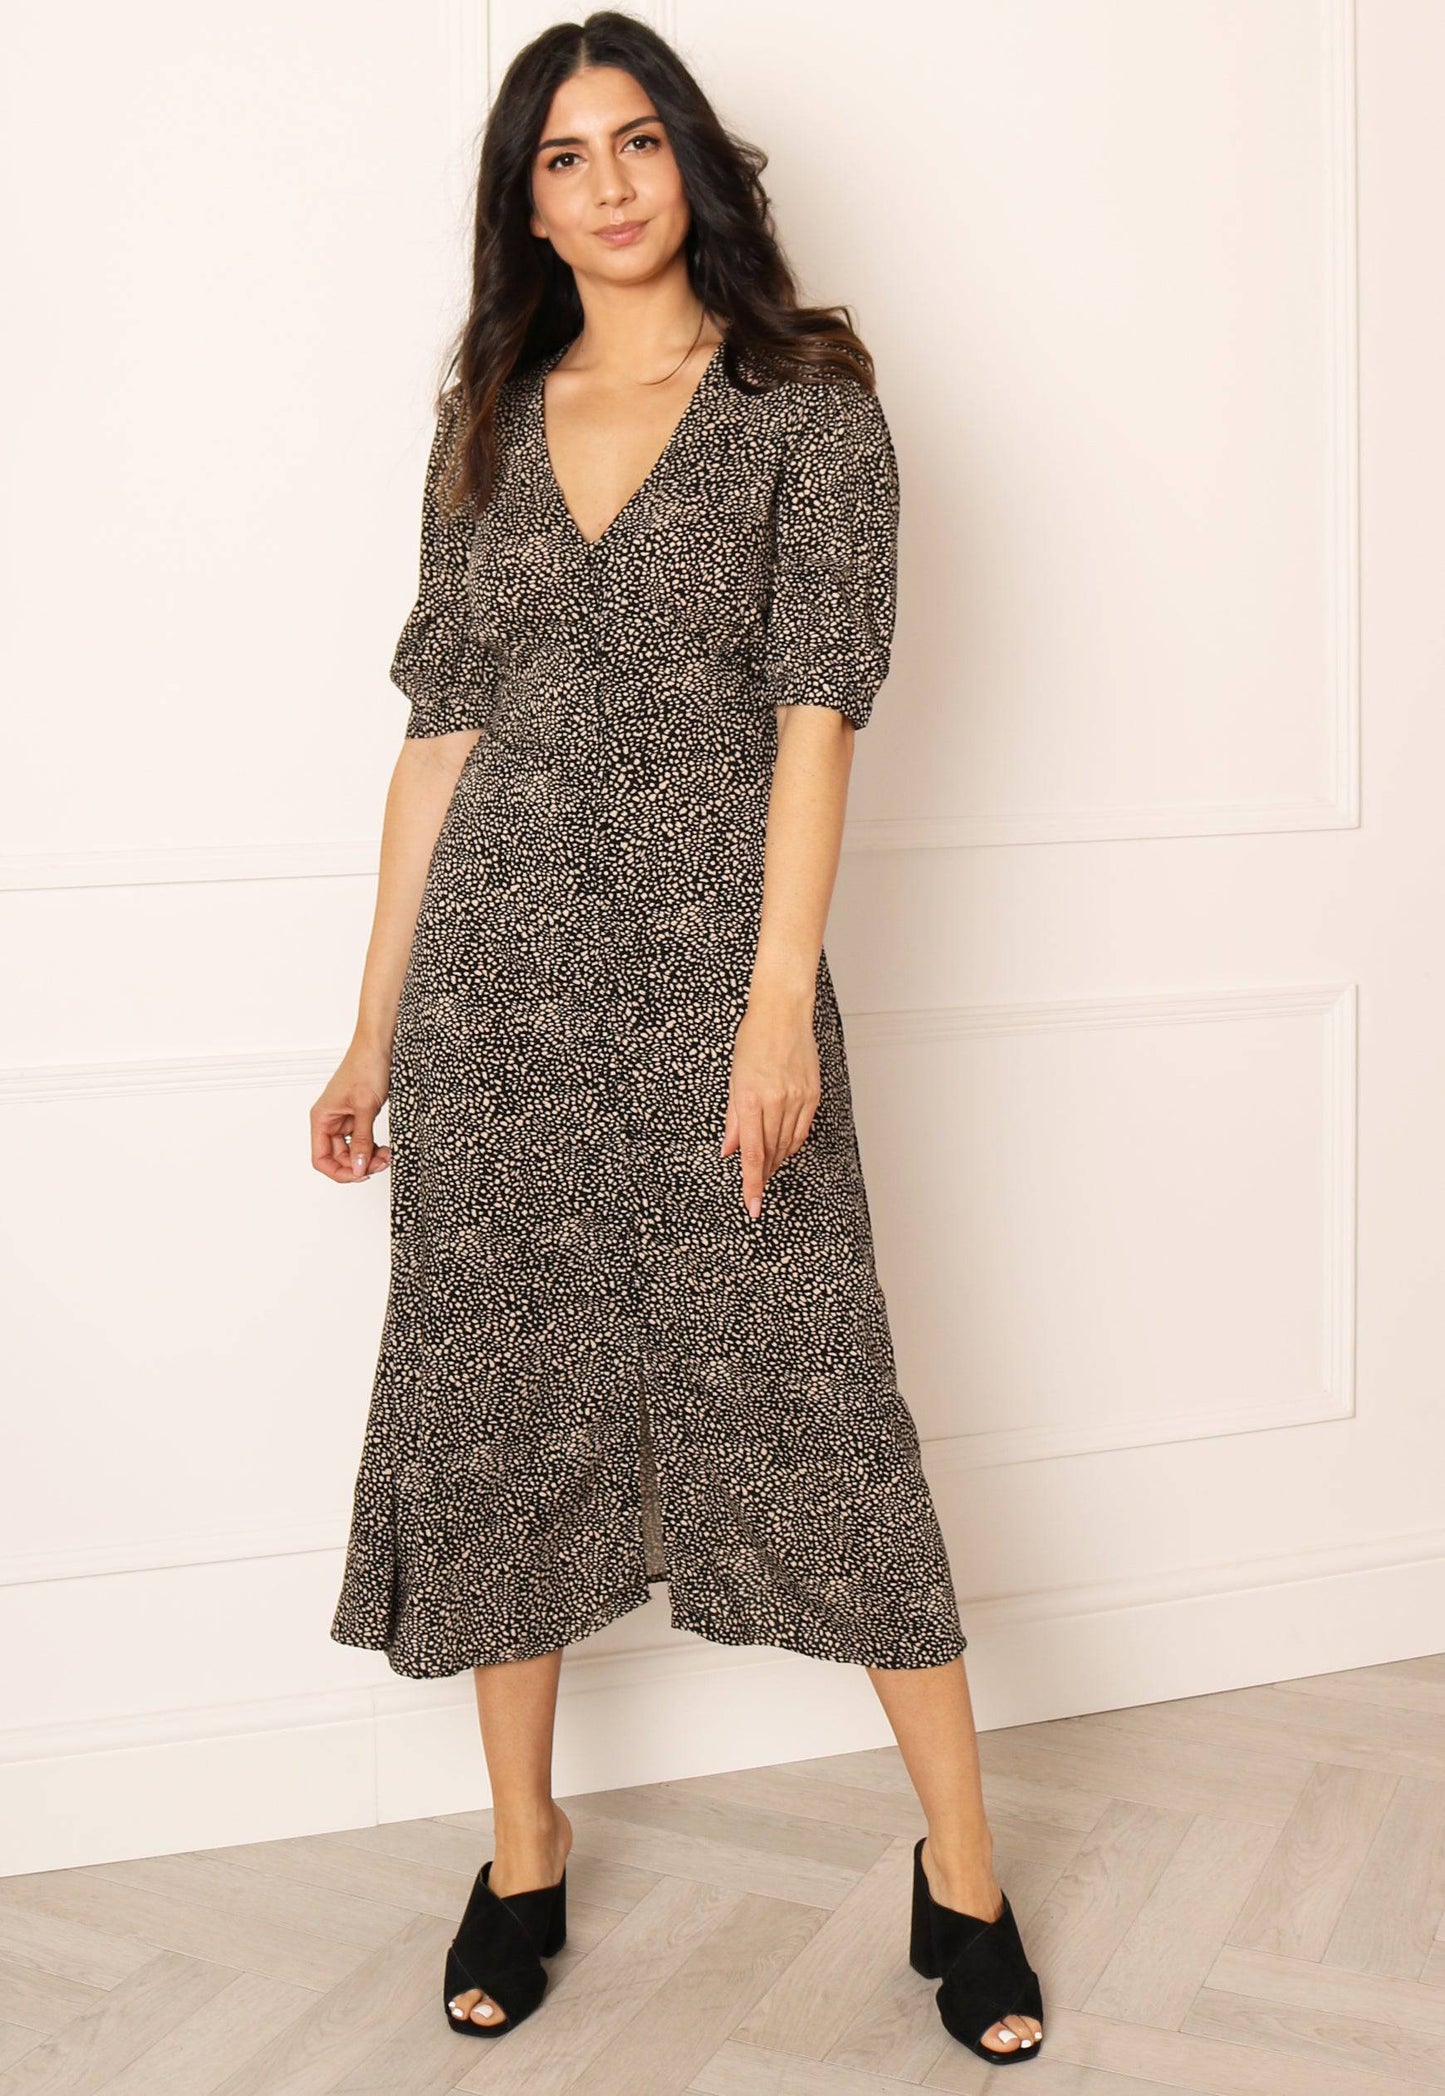 ONLY Alice Printed Button Midi Tea Dress in Black & Cream - One Nation Clothing